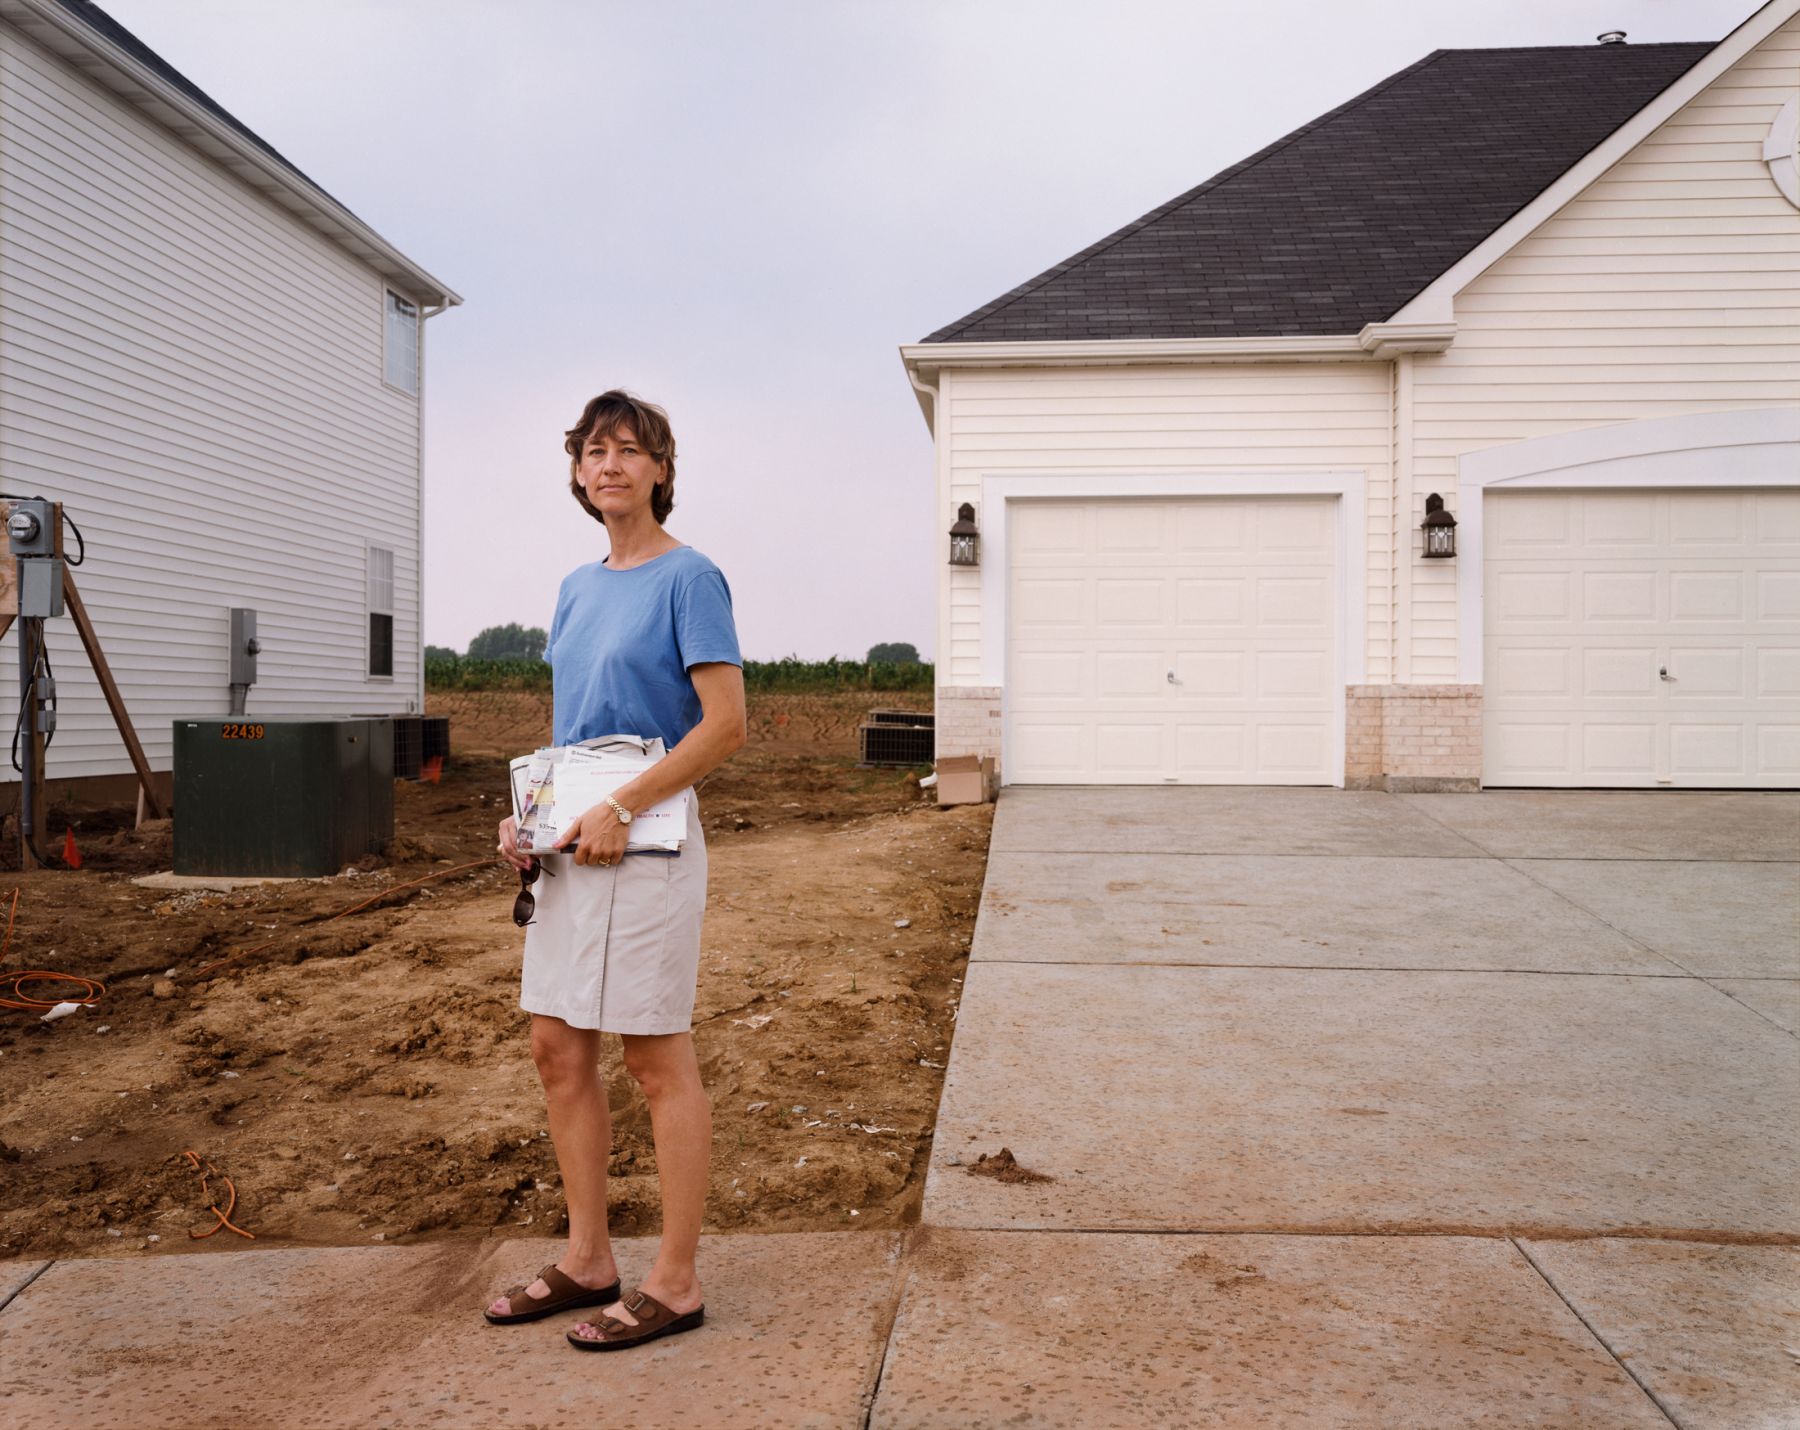 13_A Woman With Mail, Chesterfield, Missouri, June 1999.jpeg